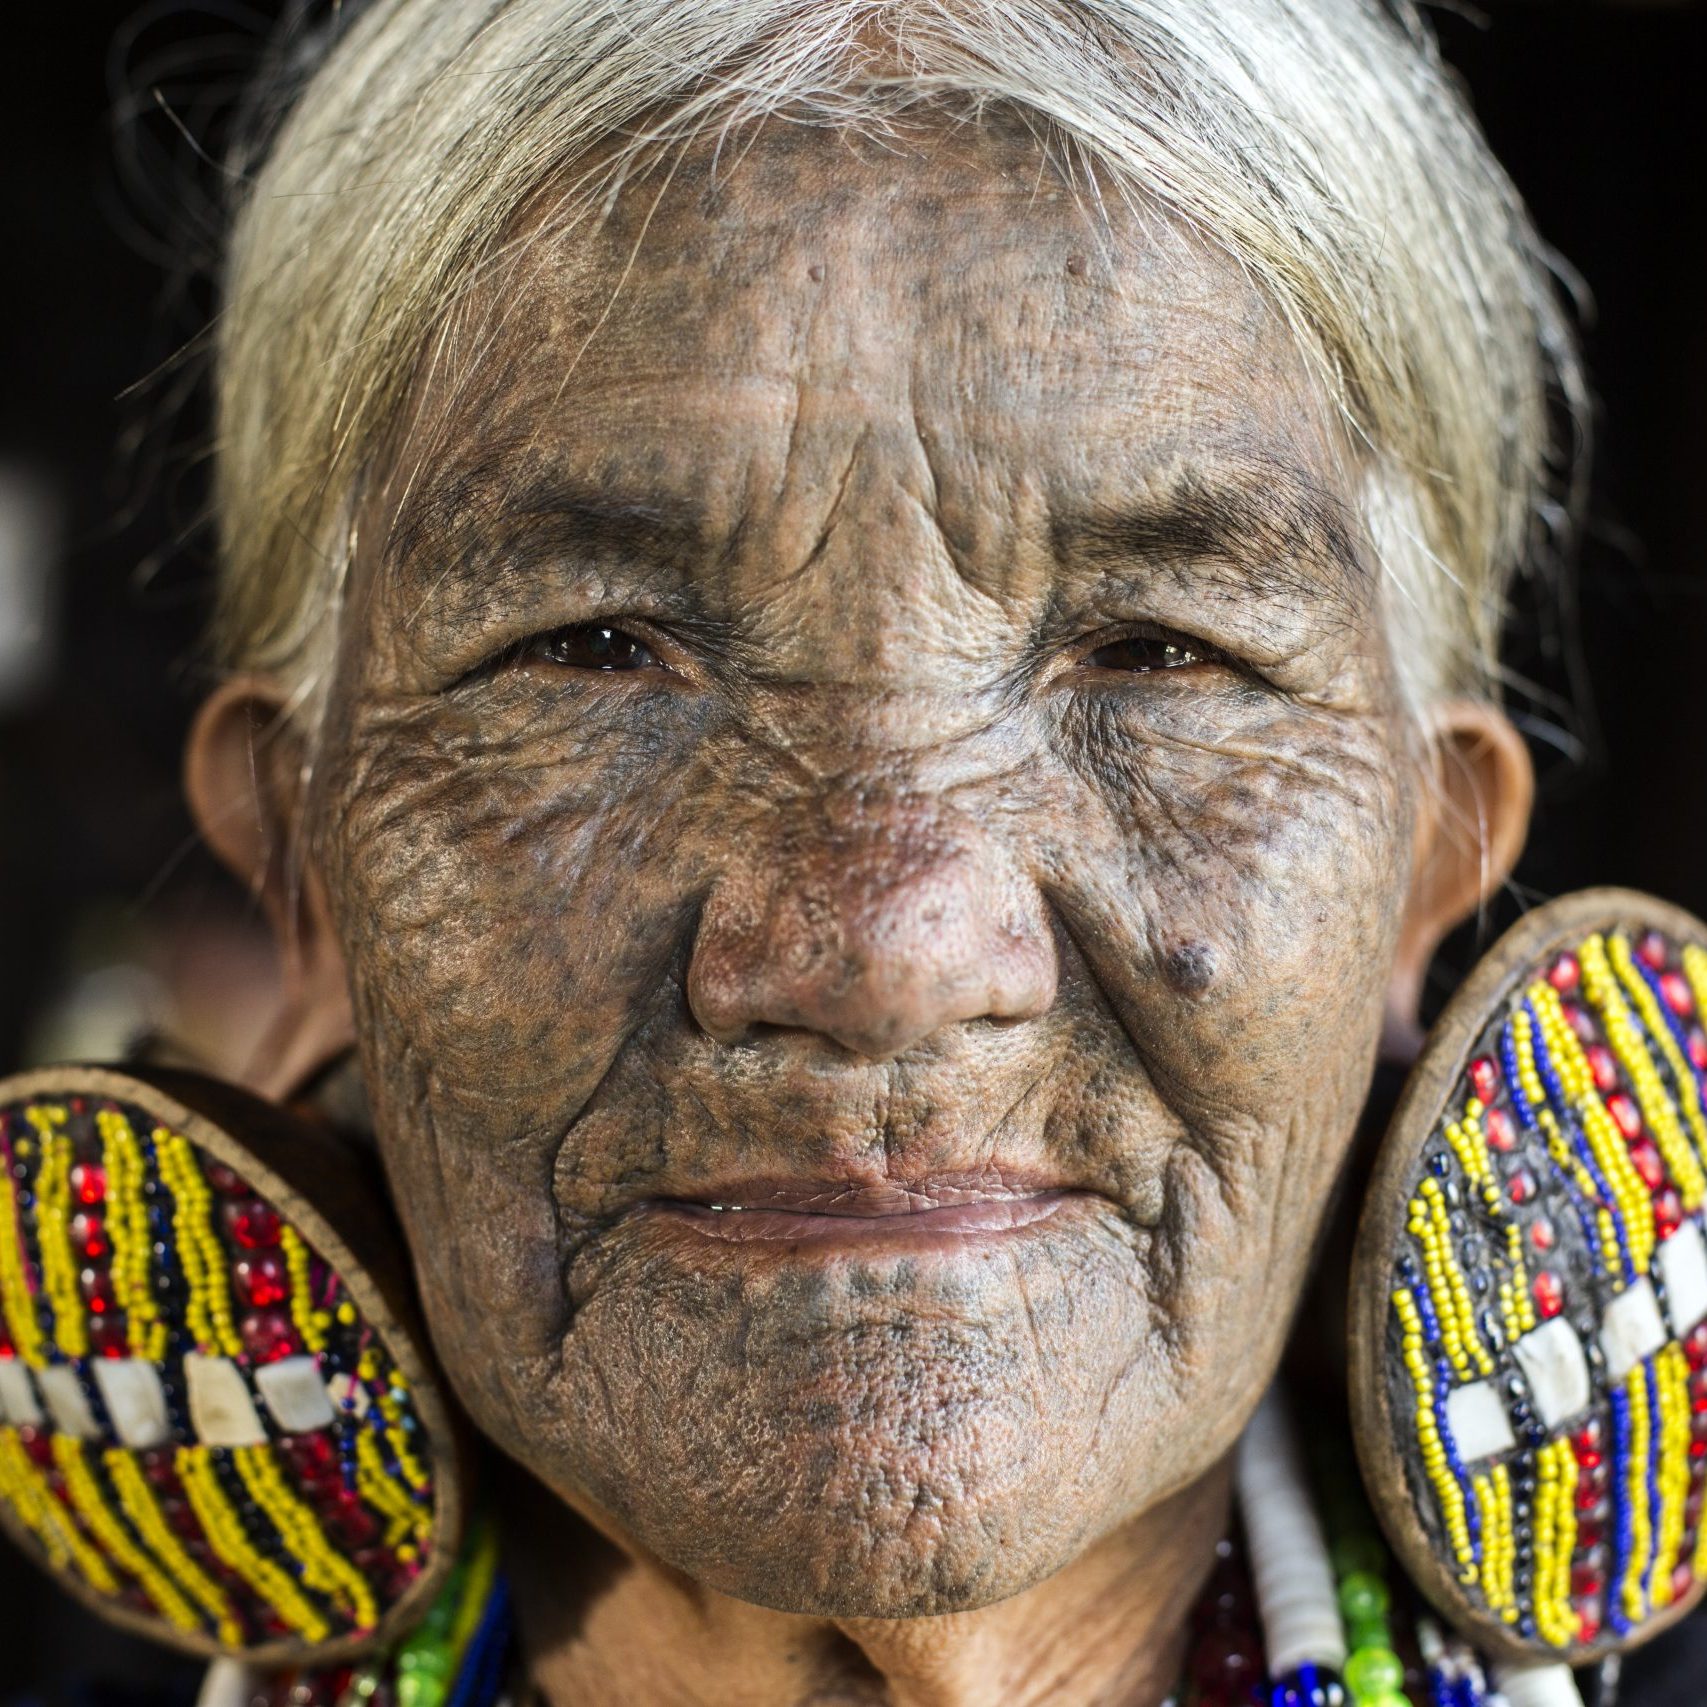 Mindat, Myanmar - December 6th, 2015: Chin tribe tattooed faced woman (Daai) is relaxing at home in Mindat while wearing her exceptionally large traditional earrings and traditional tribal dress. The practice of facial tattooing was outlawed in the 1960's and is usually only seen on old generation women. Chin people, also known as the Kakis are a number of Tibeto-Burman tribal people.